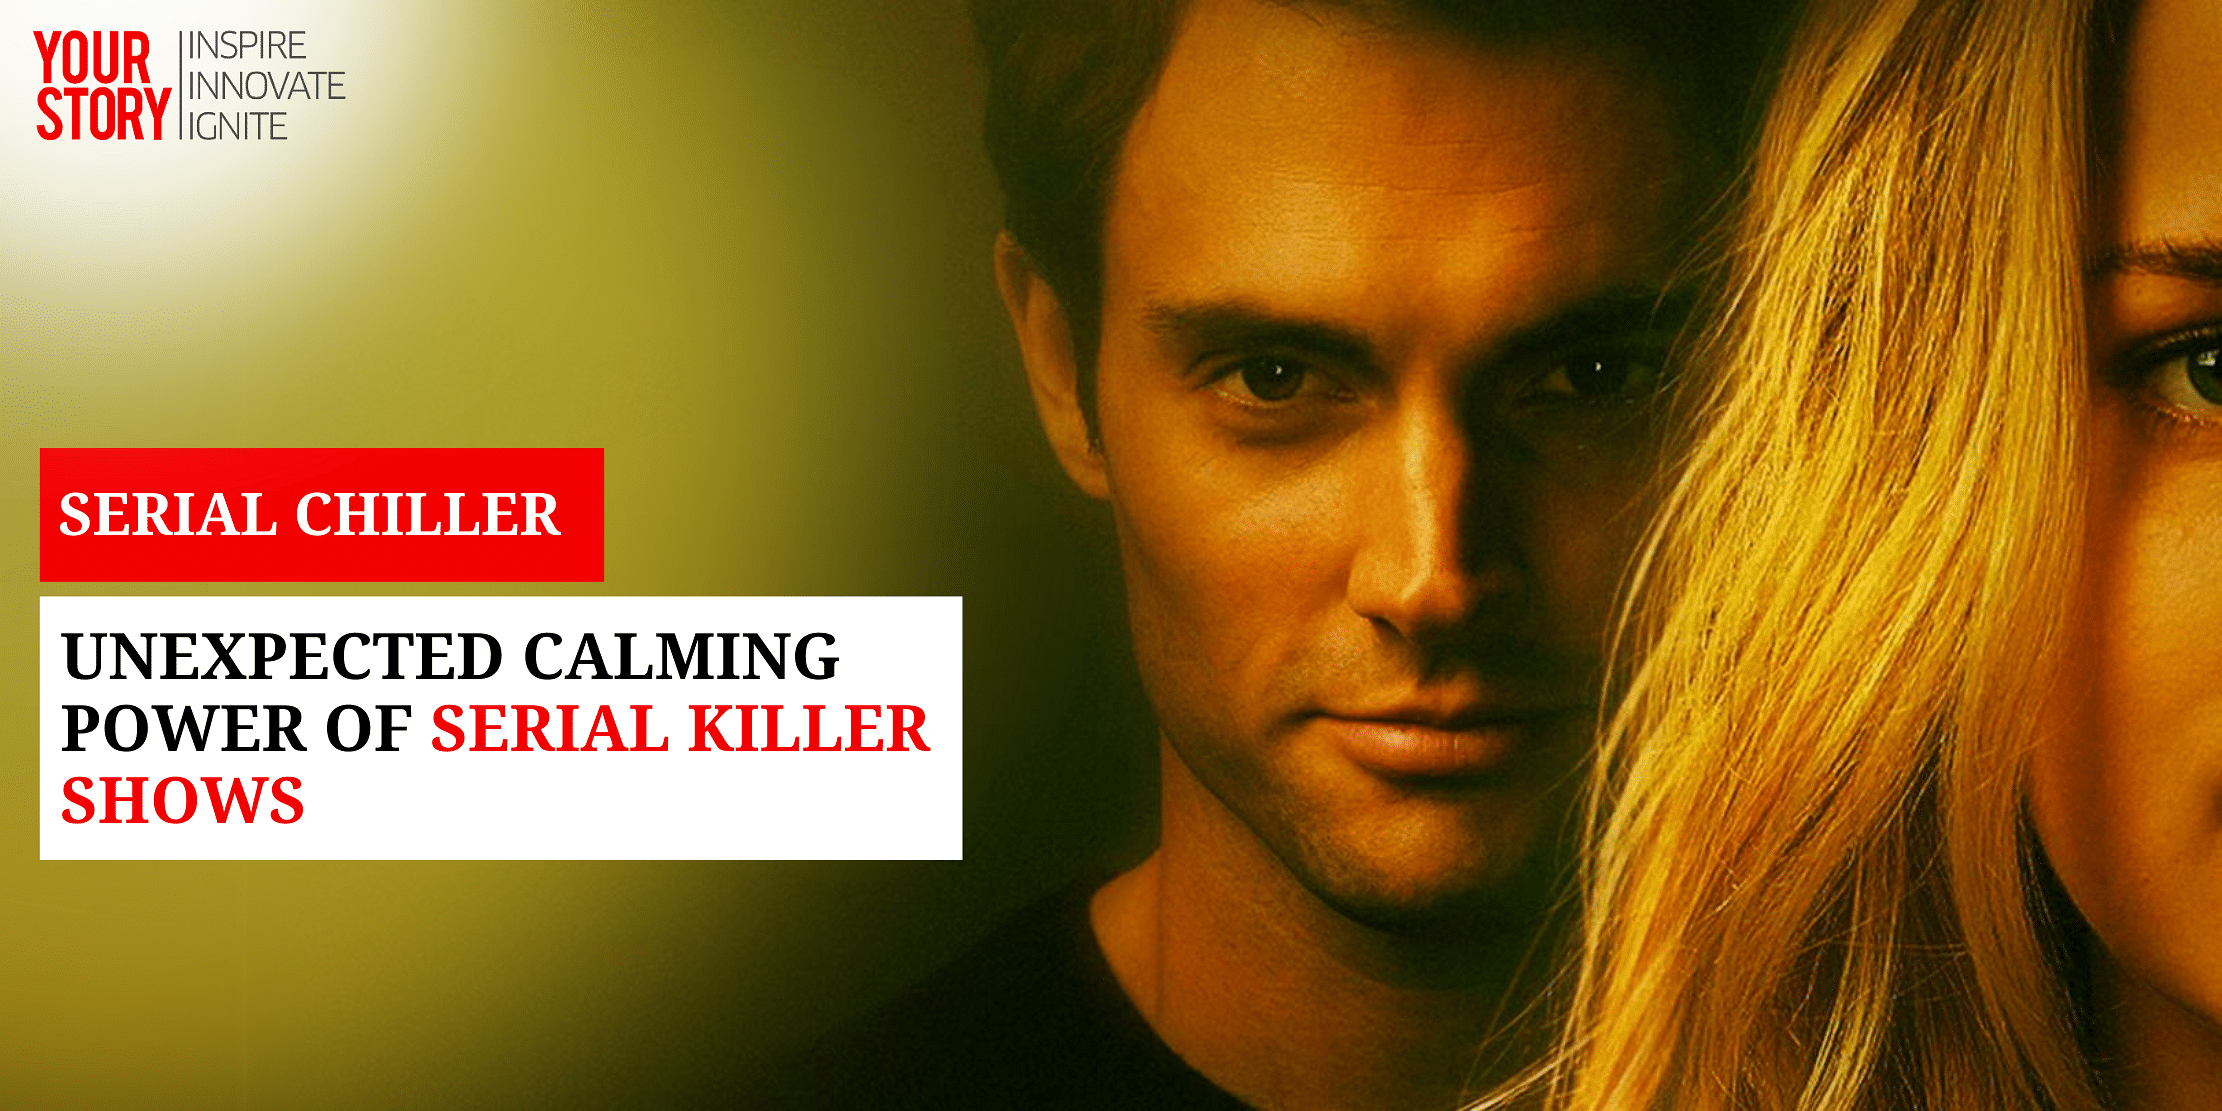 You are currently viewing Serial Chillers: Unexpected Calming Power of Serial Killer Shows